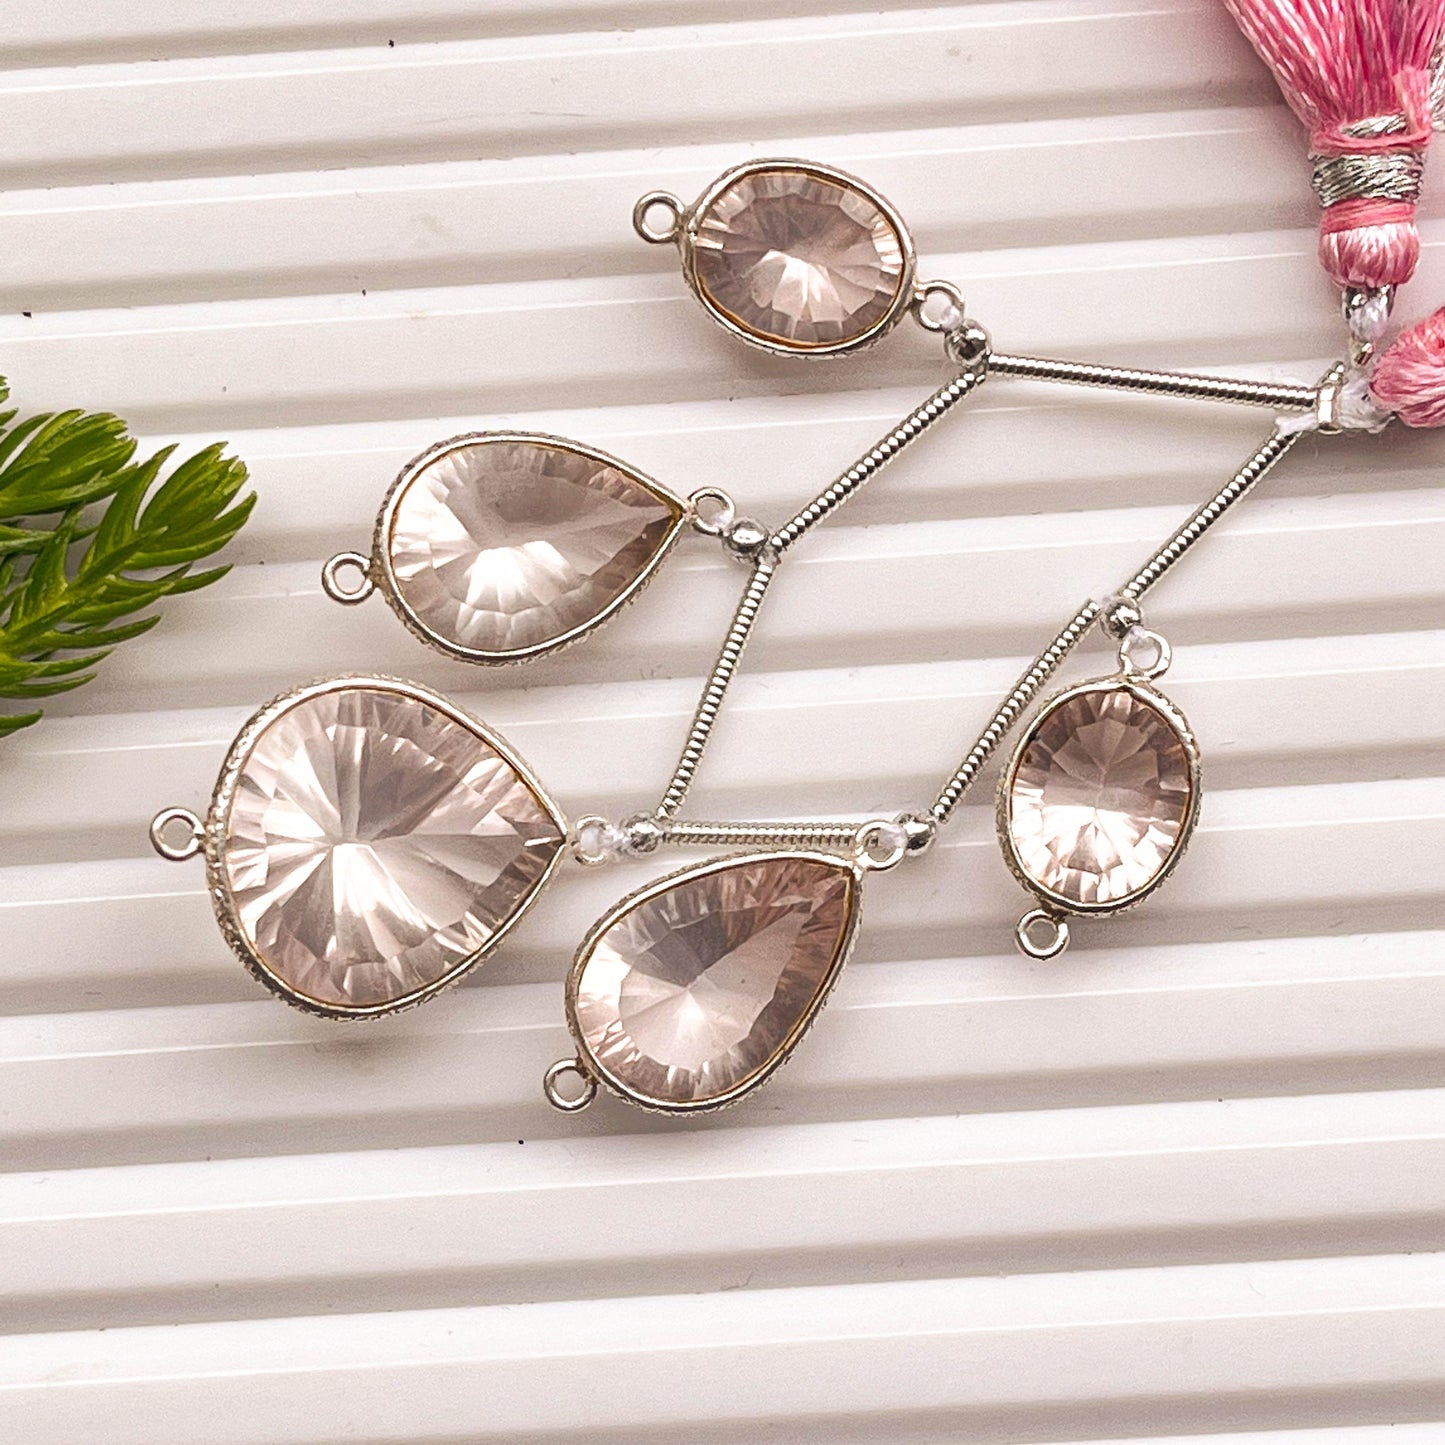 5 Pieces Rose Quartz Concave Cut stone Mix Shape 925 Silver bezel set Connectors for Jewelry making Beadsforyourjewelry